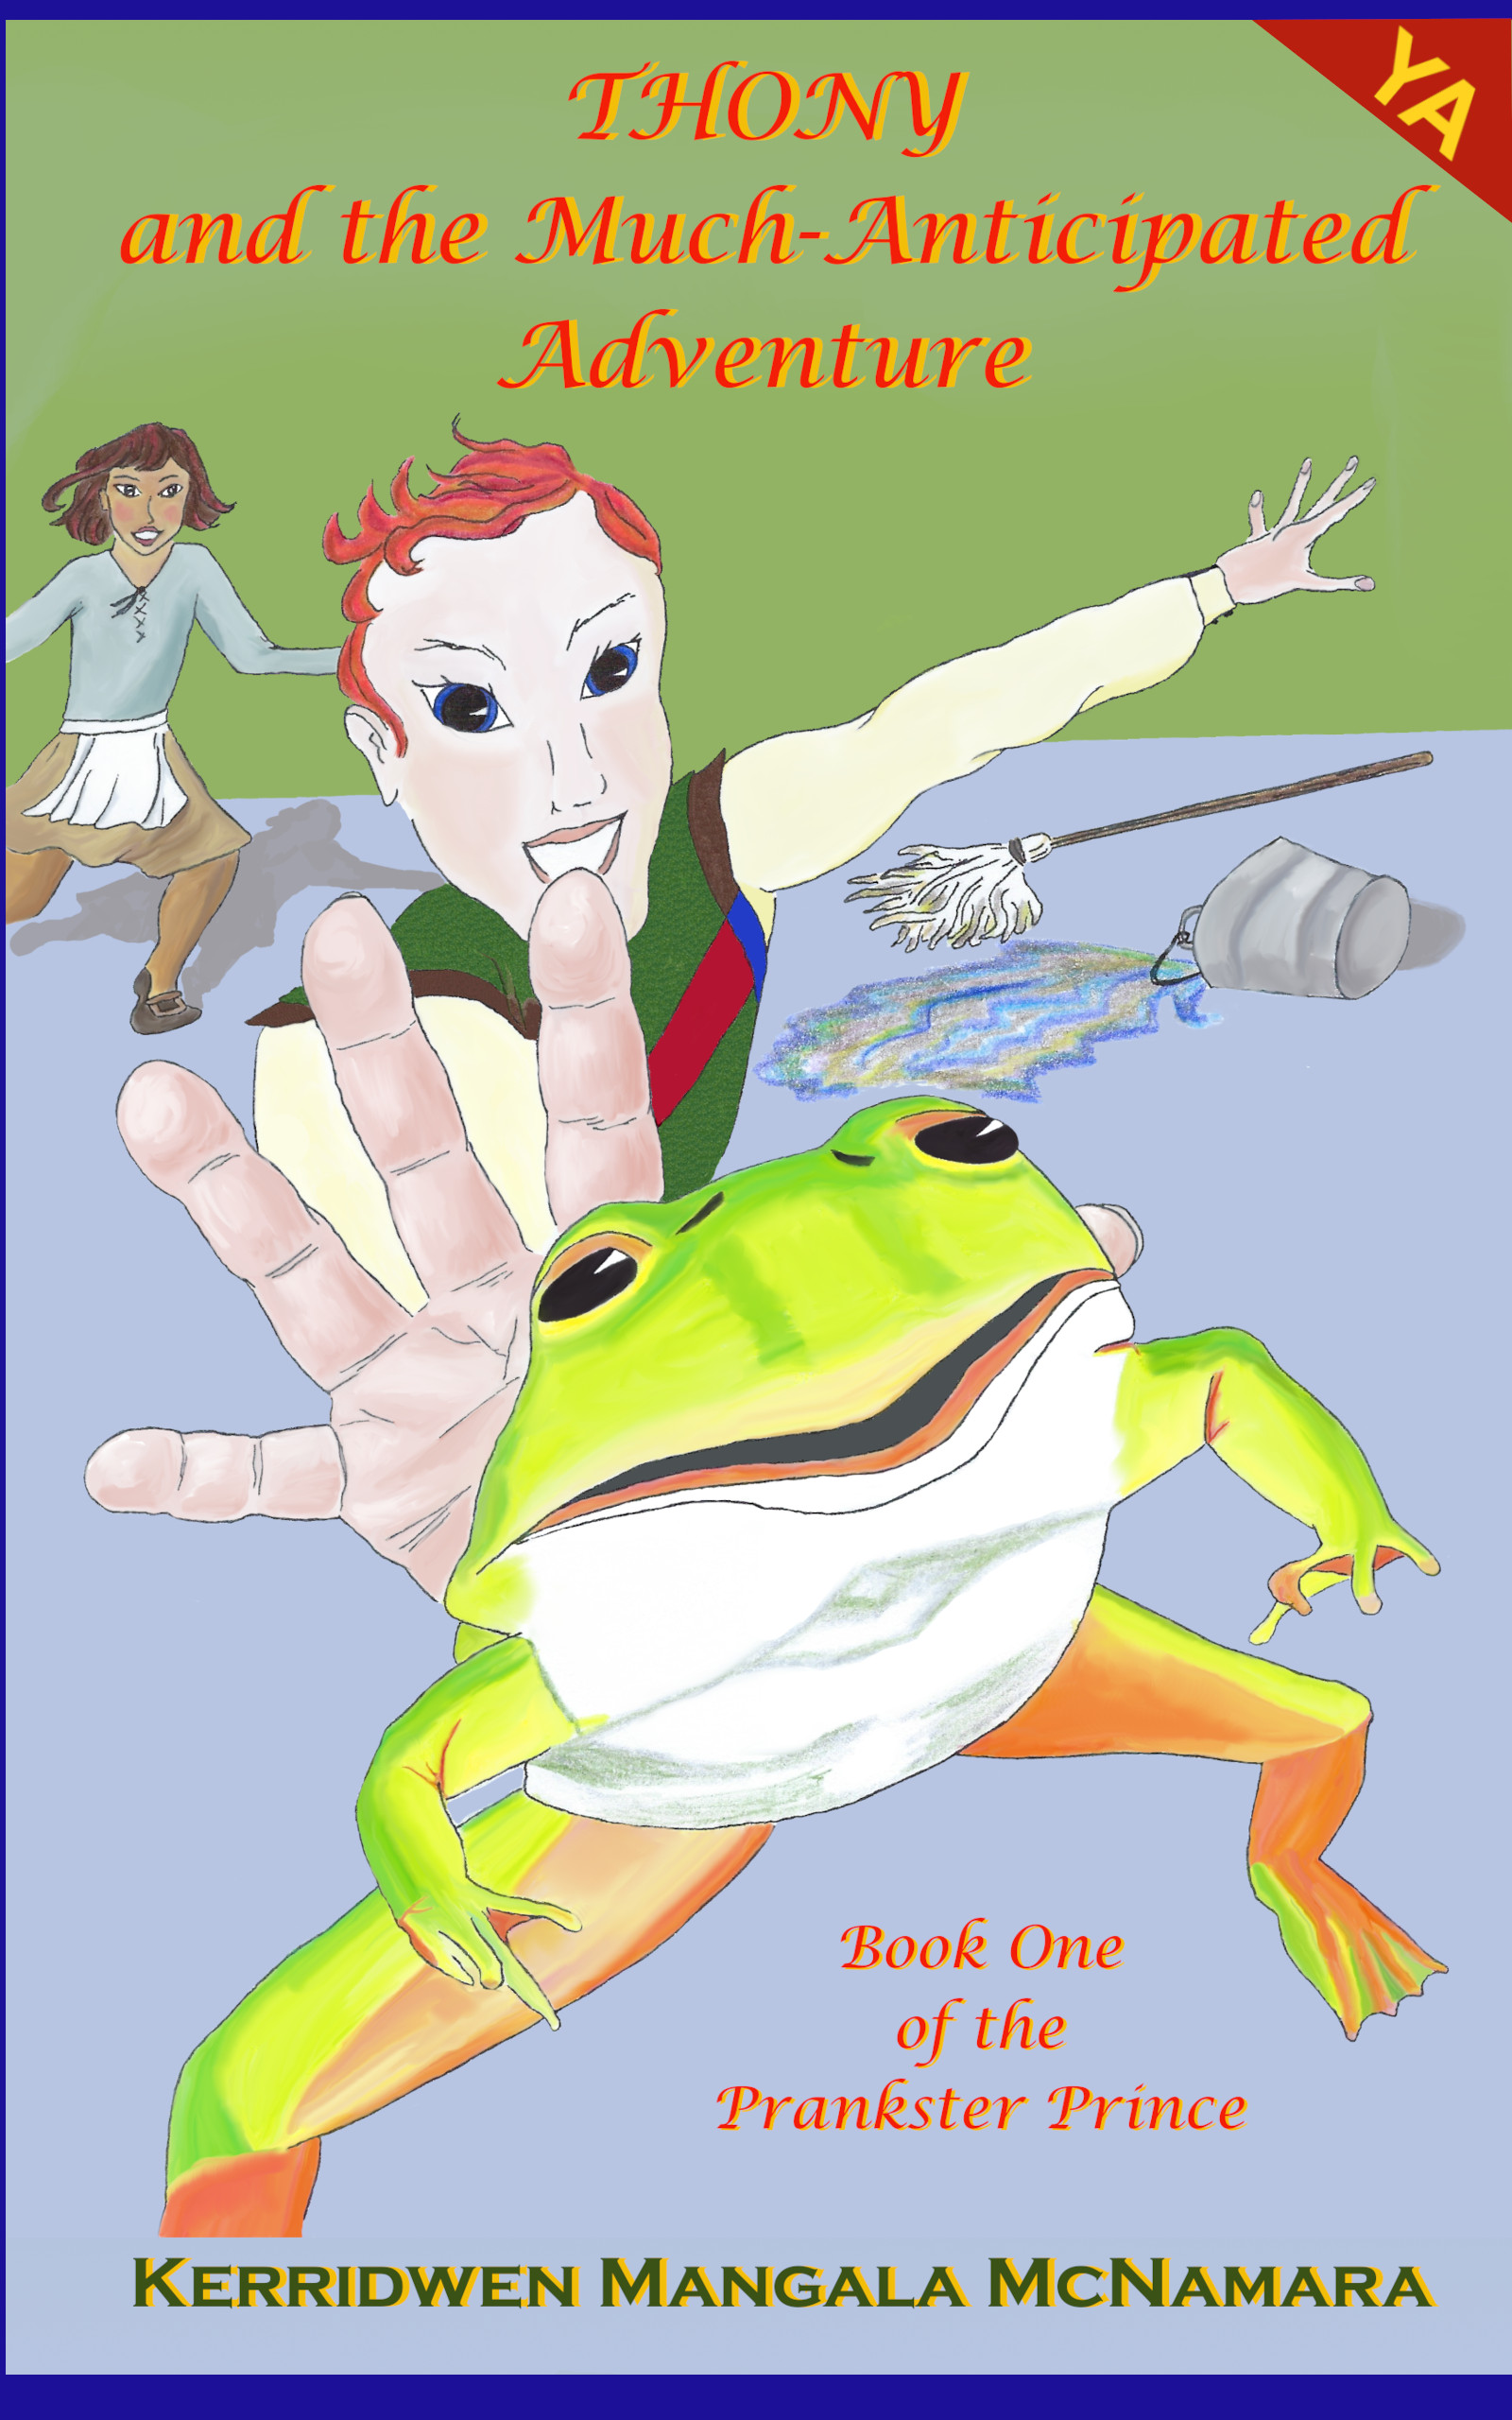 Cover for book: Thony and the Much-Anticipated Adventure, Book One of the Prankster Prince